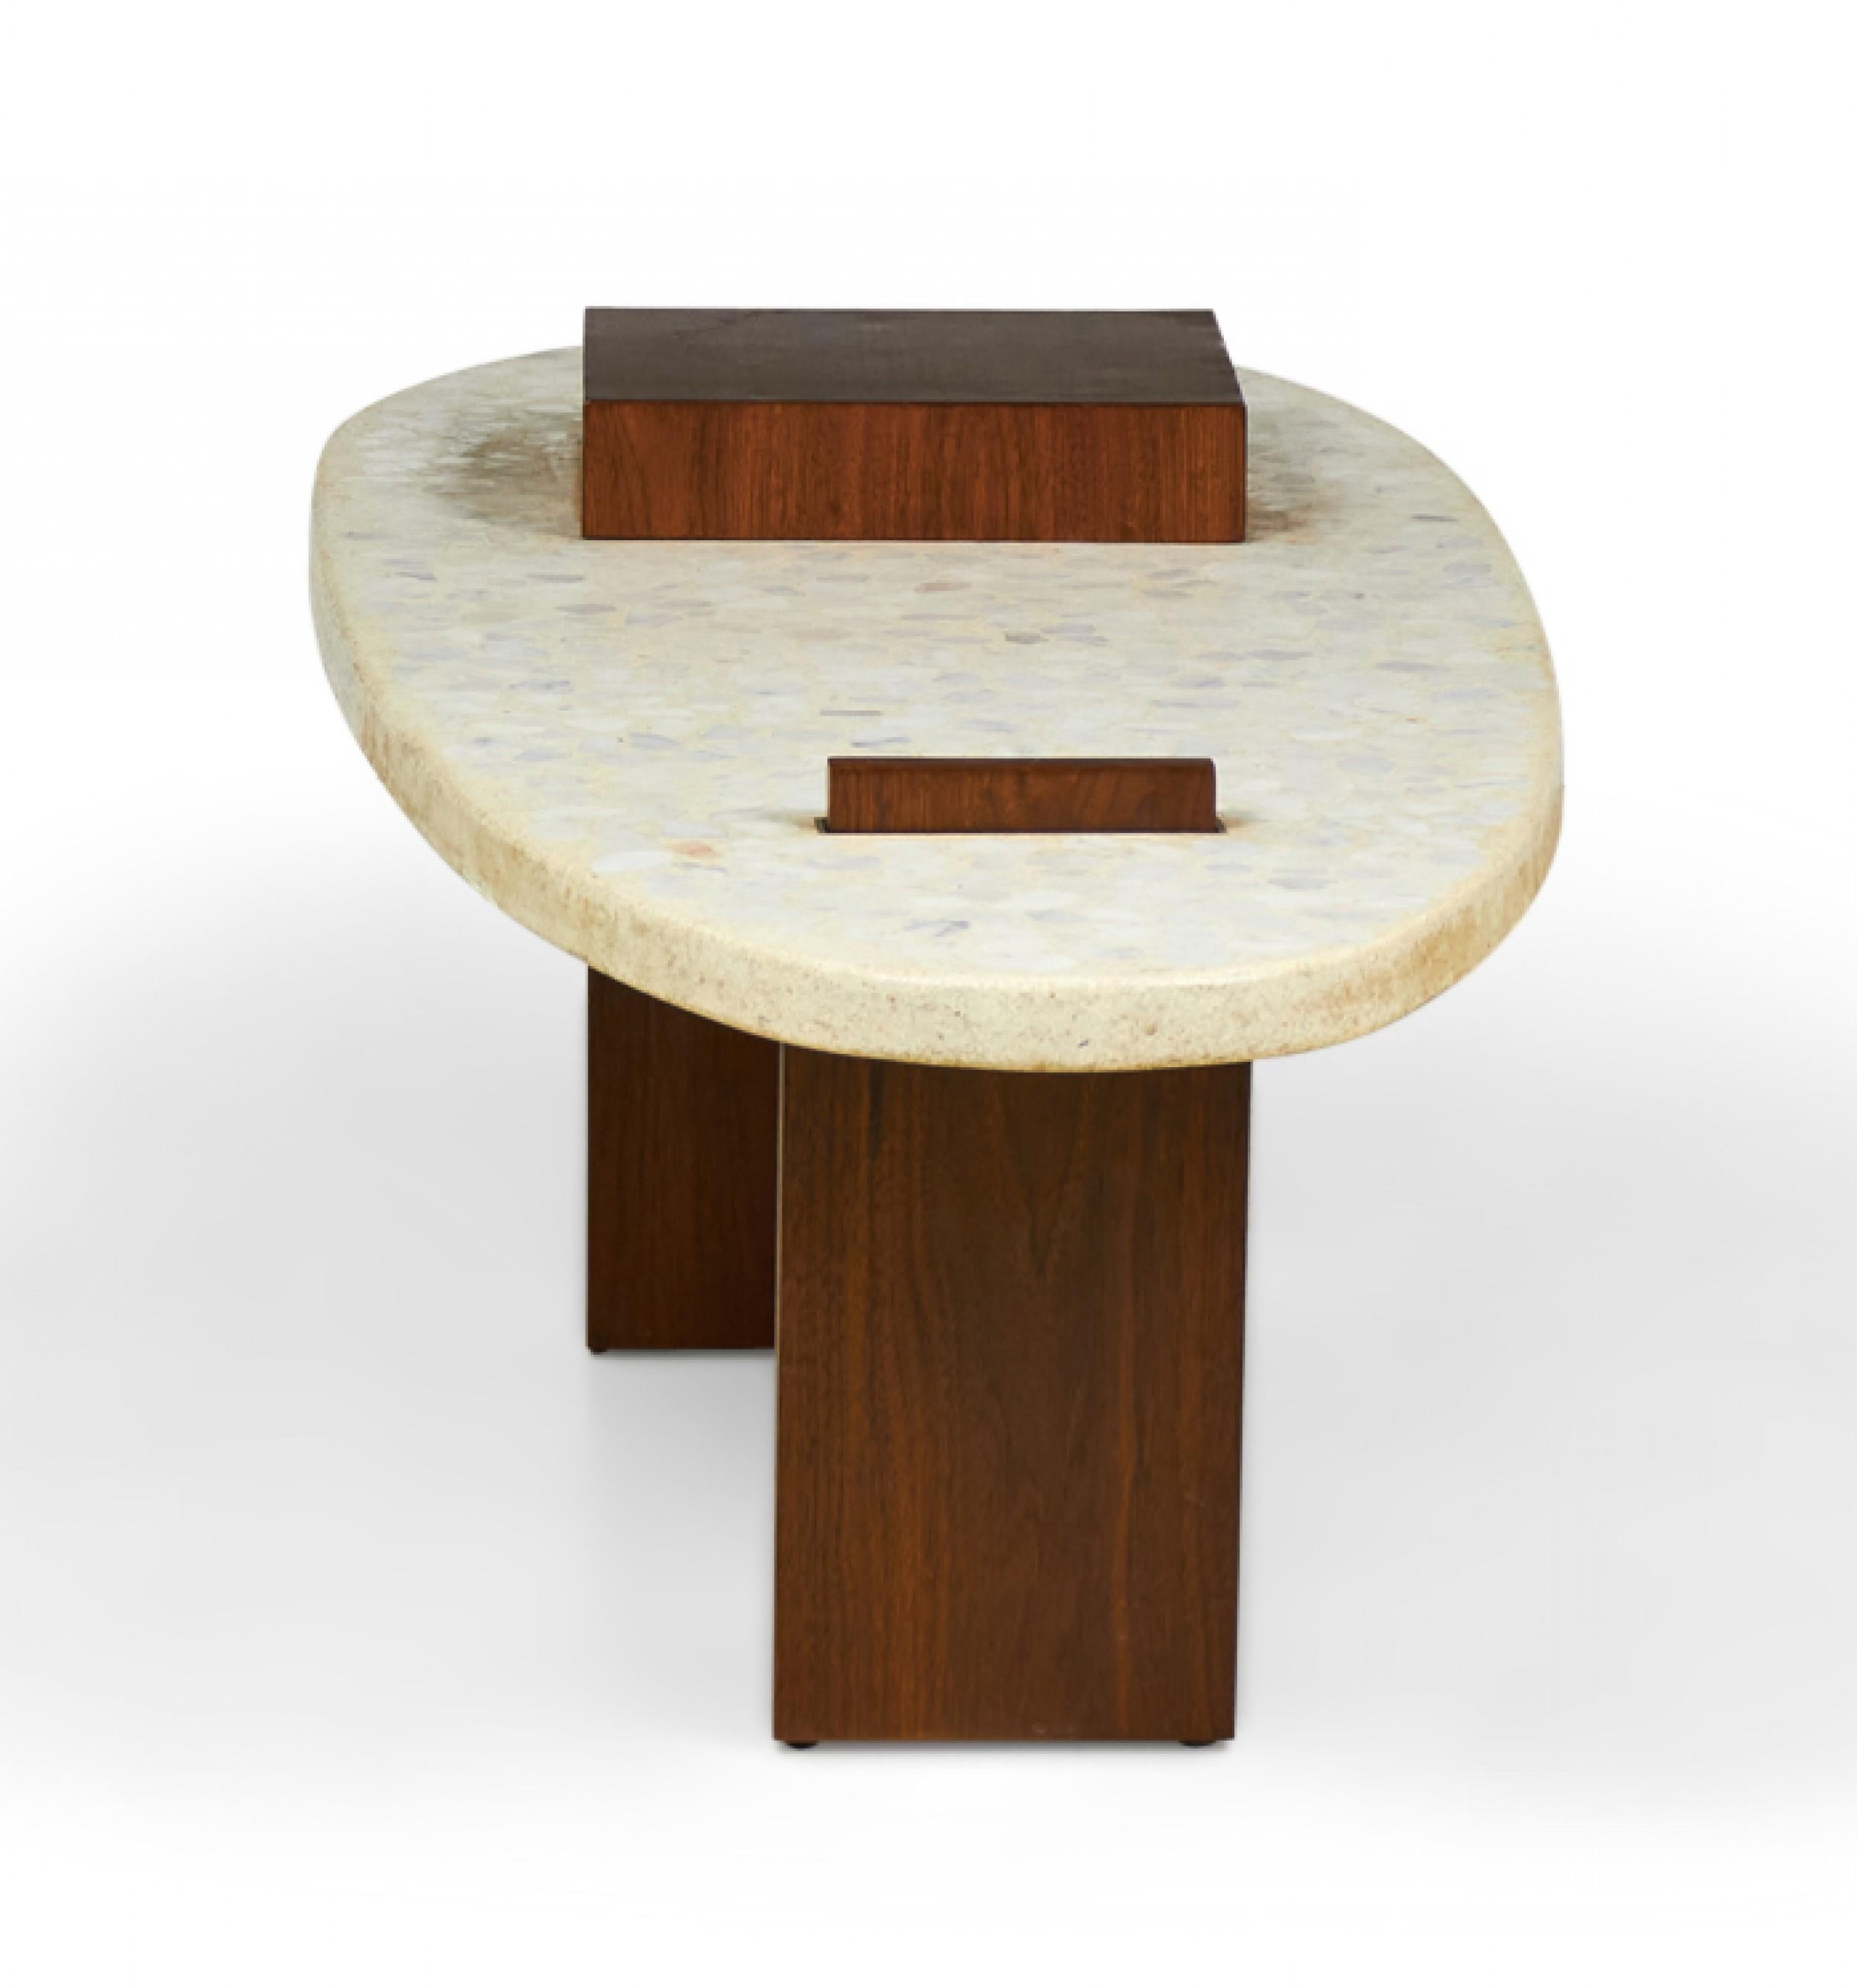 American Mid-Century (circa 1950) sculptural cocktail / coffee table with a tapered oval terrazzo top reminiscent of a surfboard and walnut 'post' and 'fin' legs that support and pierce the table surface. (manner of HARVEY PROBBER).